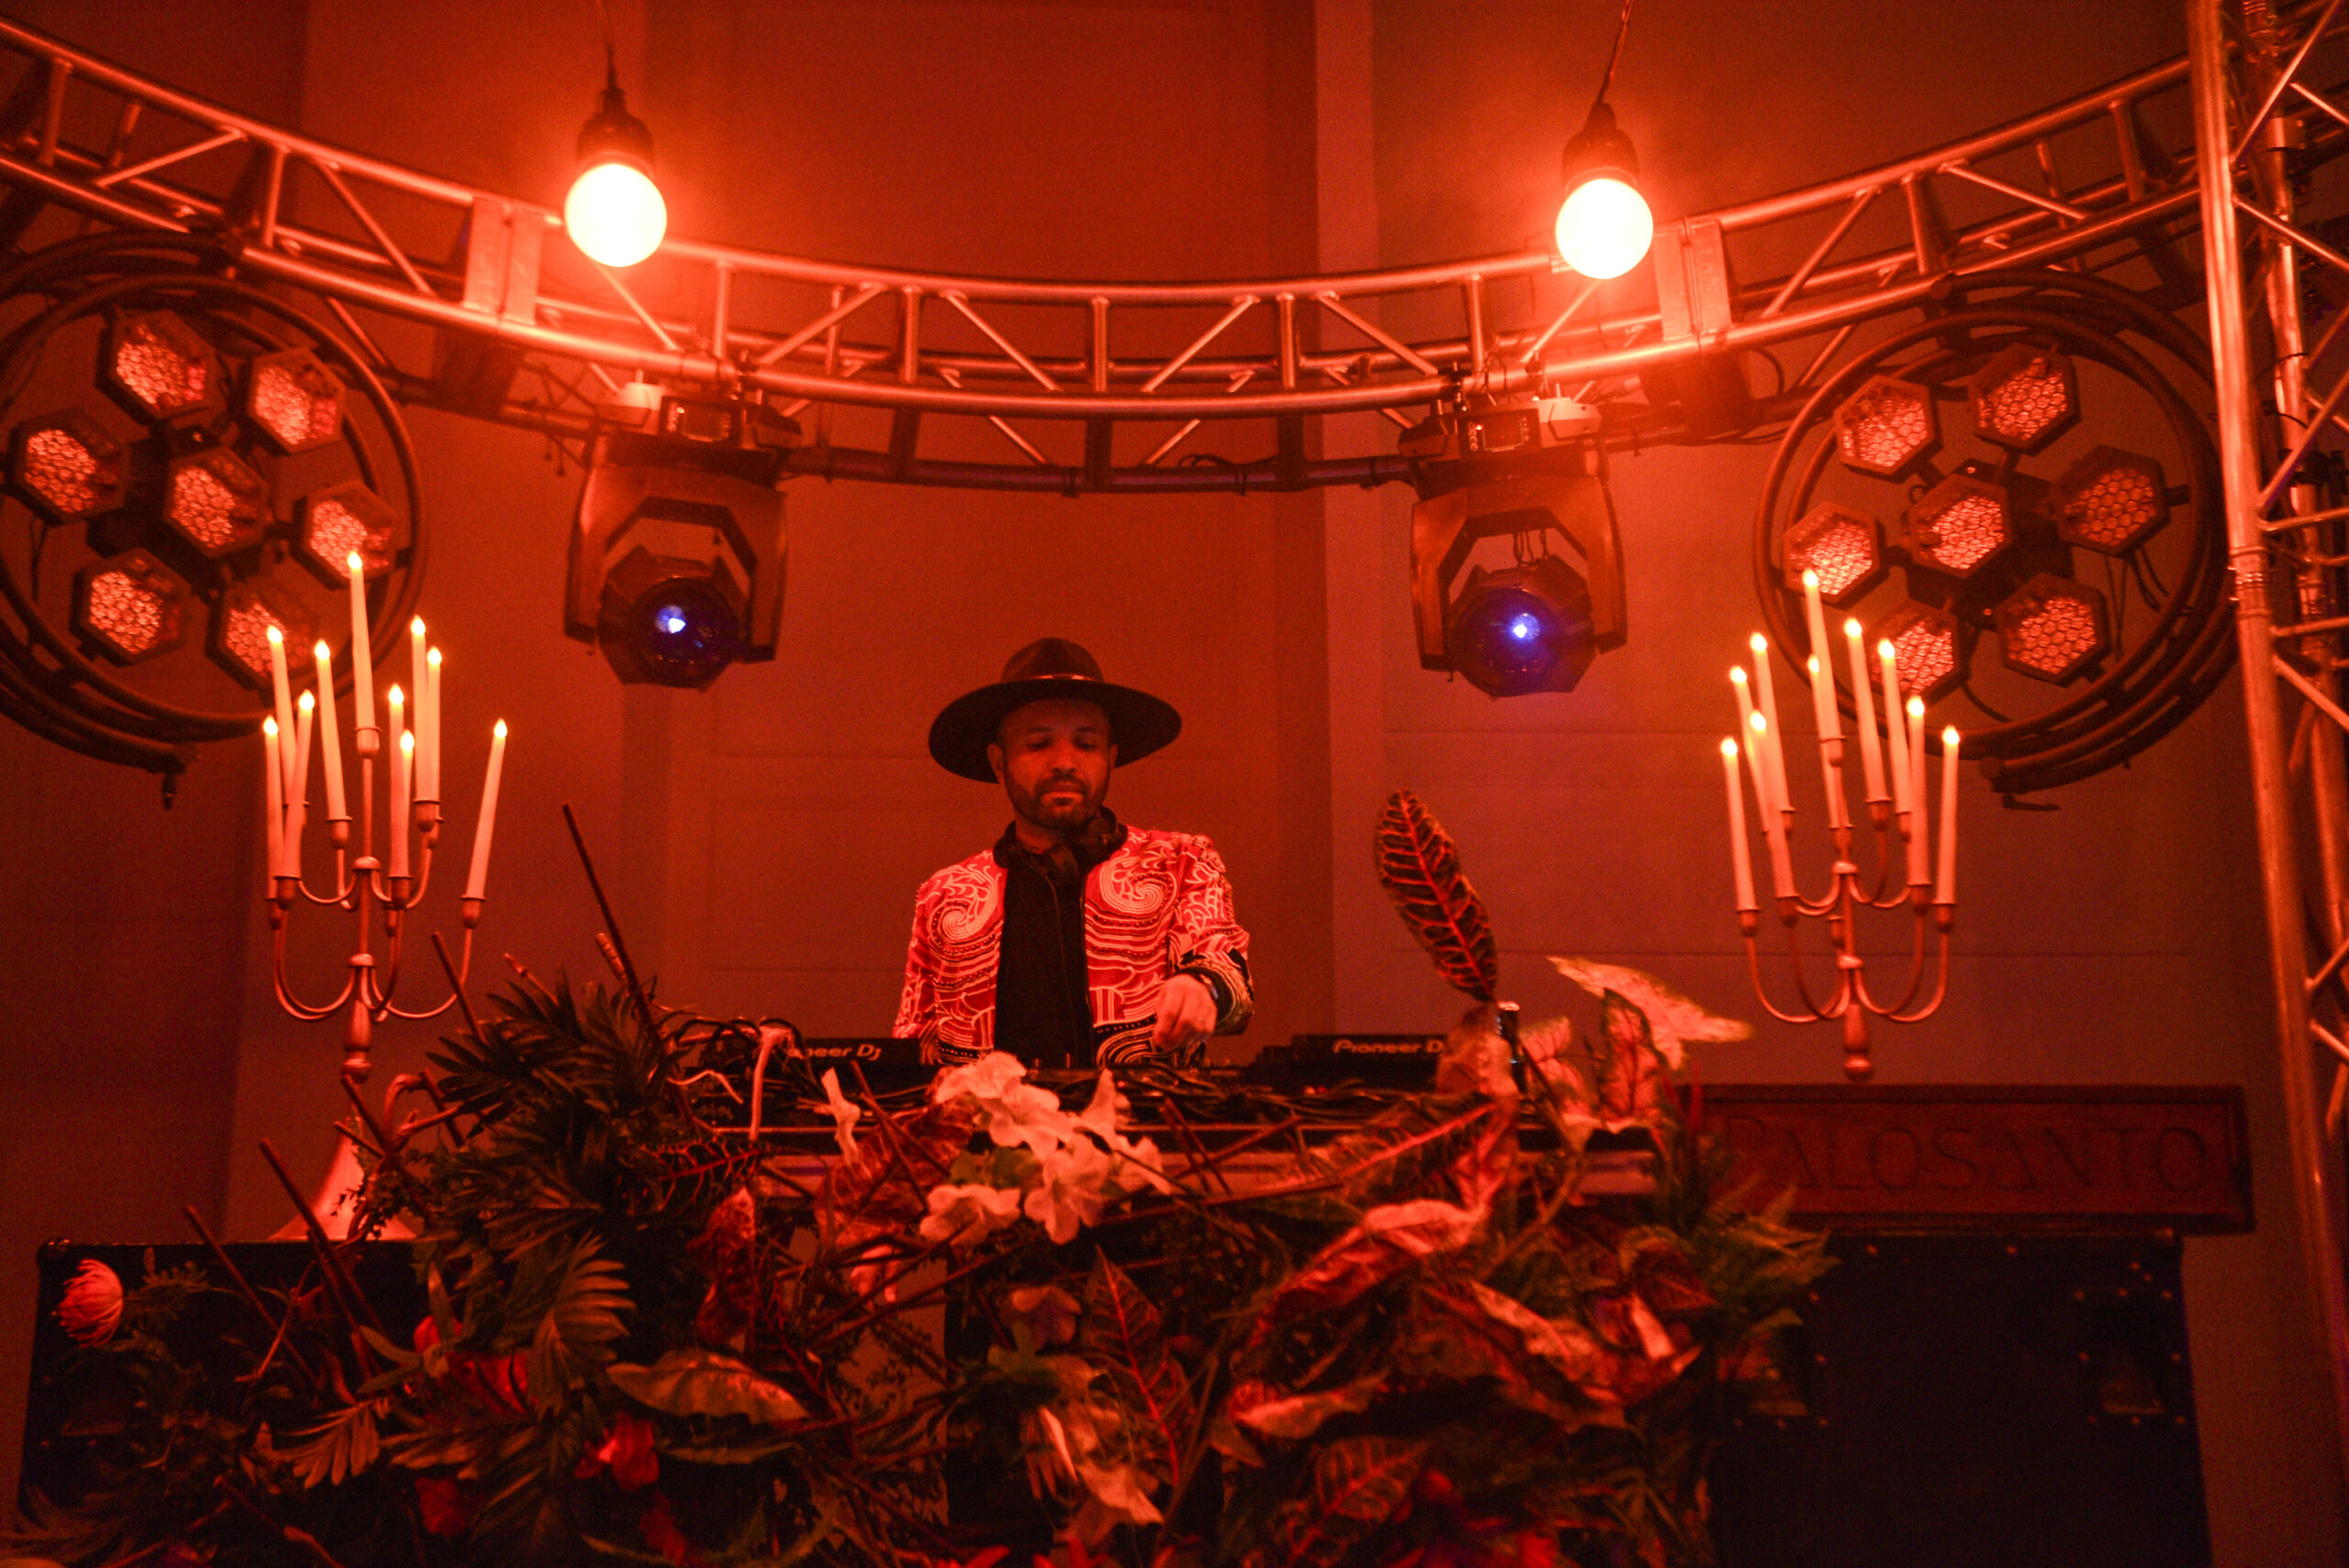 A DJ wearing a hat and patterned jacket performs on stage surrounded by red lighting, candelabras, and floral decorations.